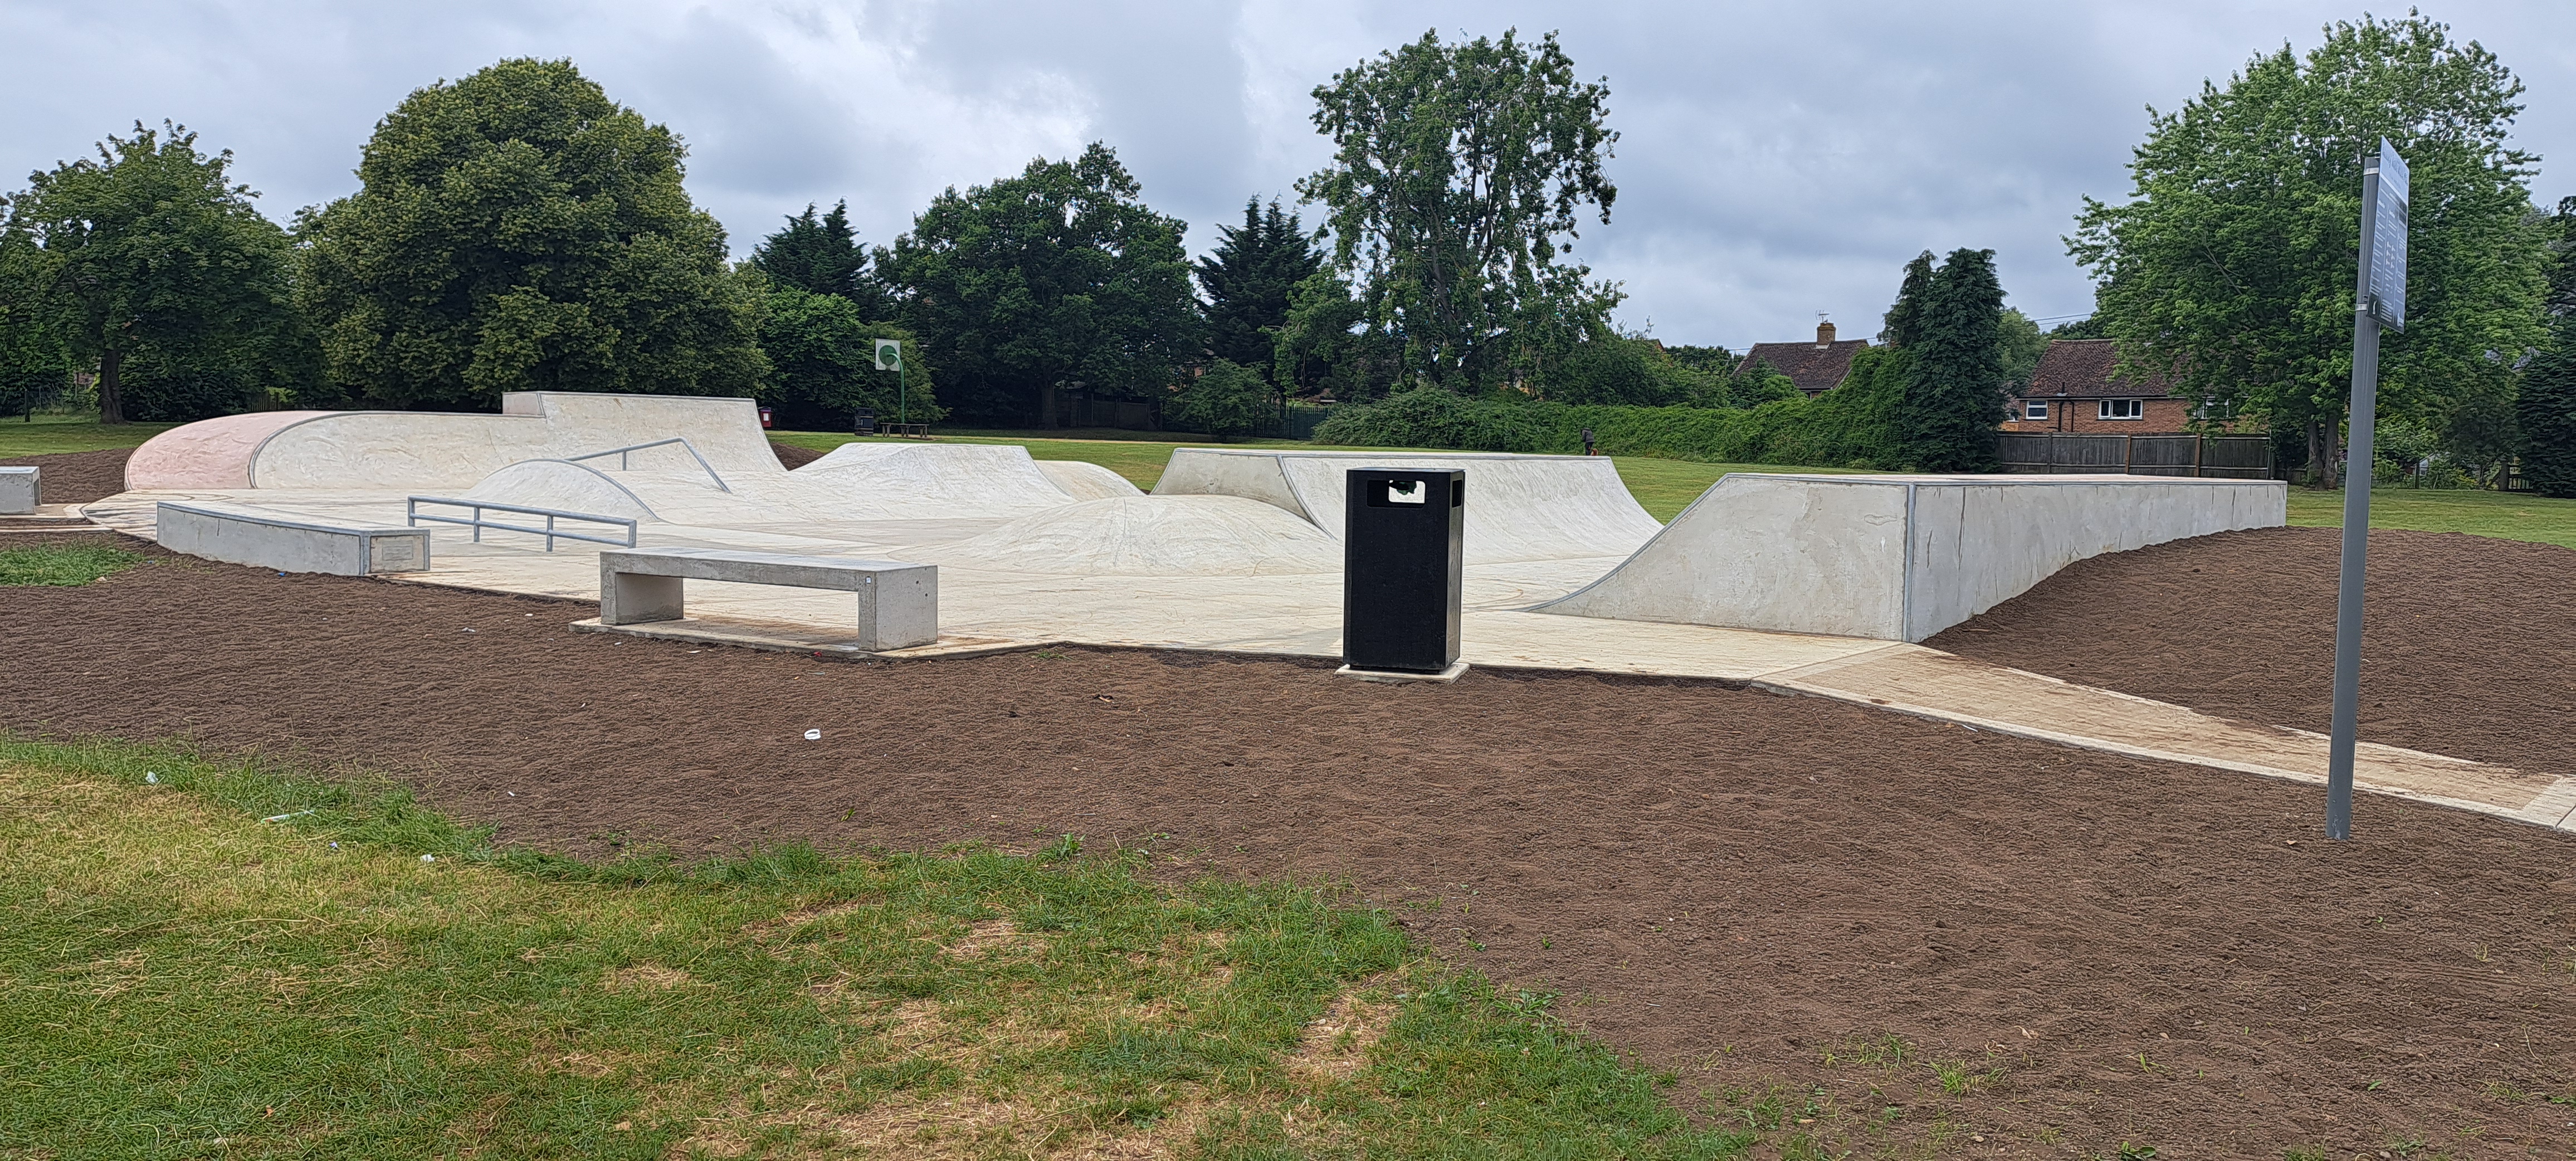 picture shows new skatepark installation at ramsey road in halstead